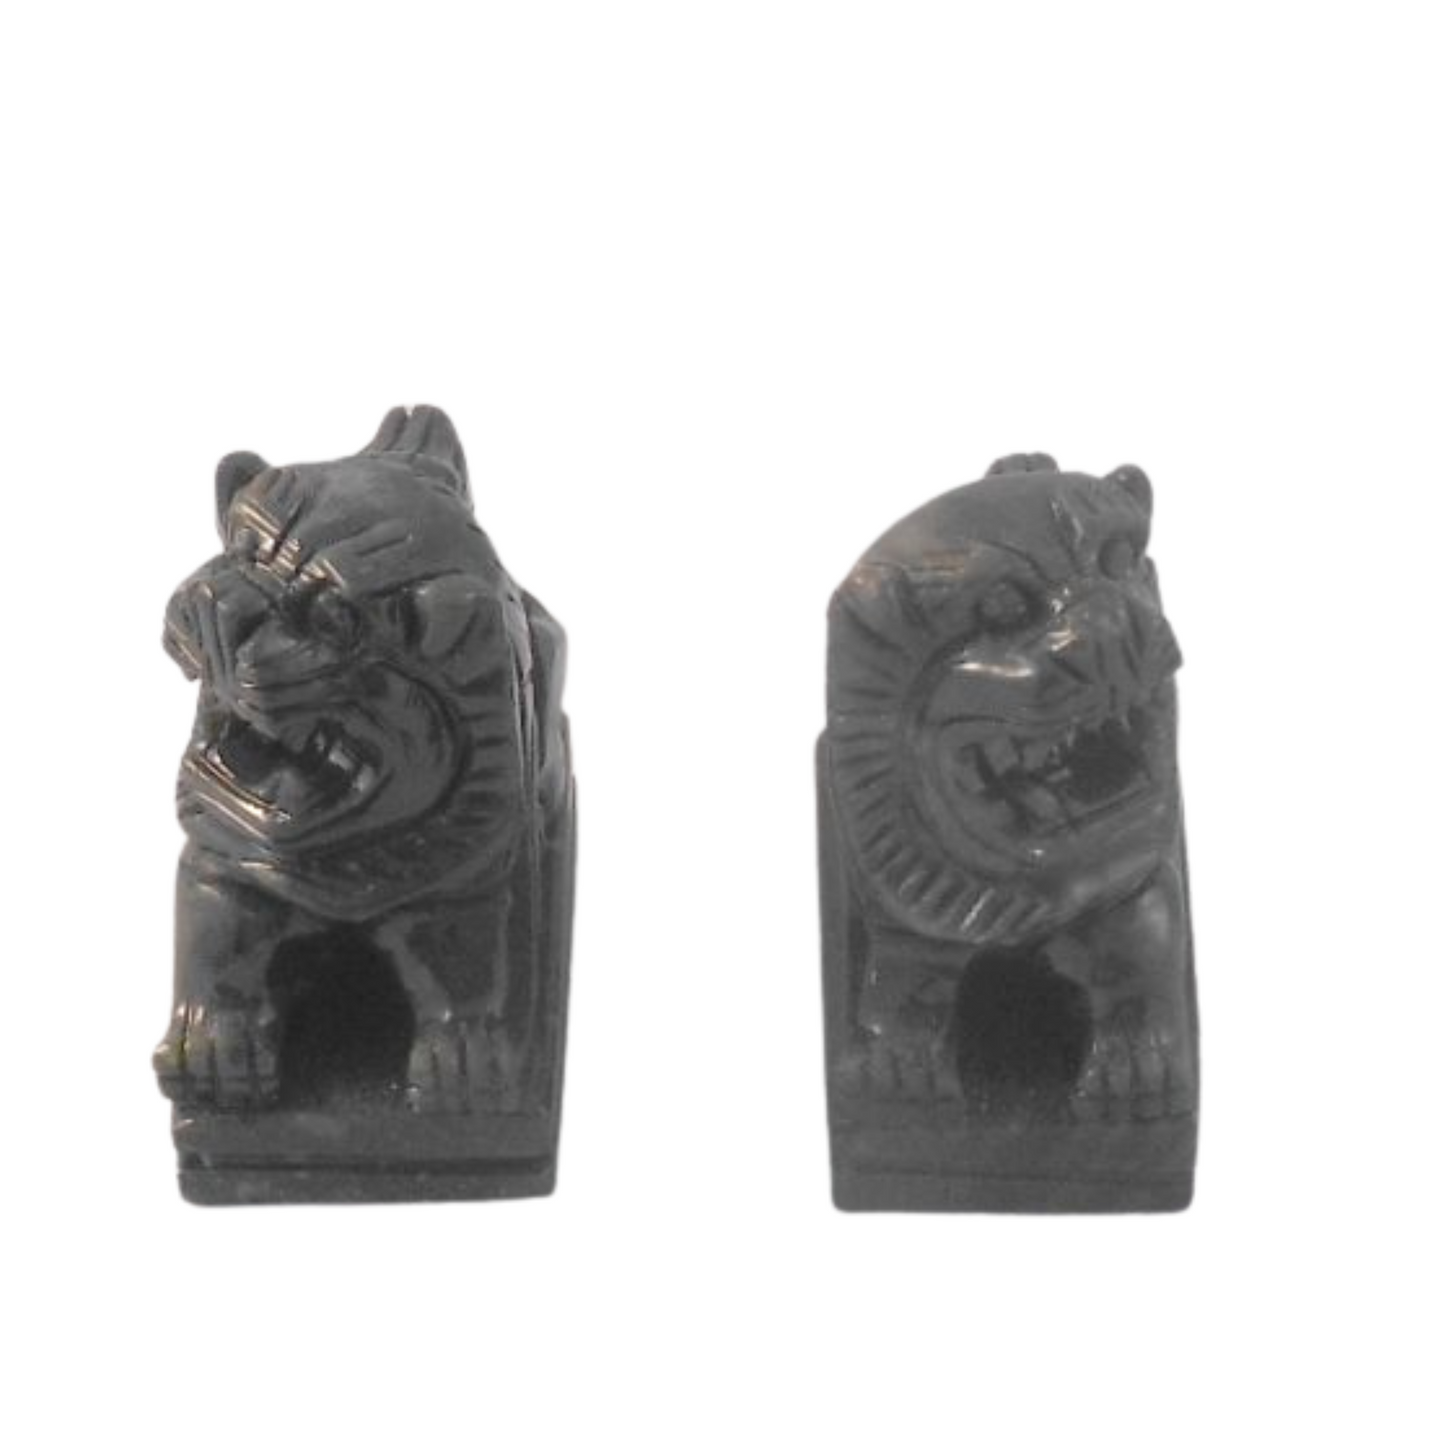 Fire Sale! Foo Dogs Statues Asian Art Small Pair Jade Gemstone Temple Lions Sculptures